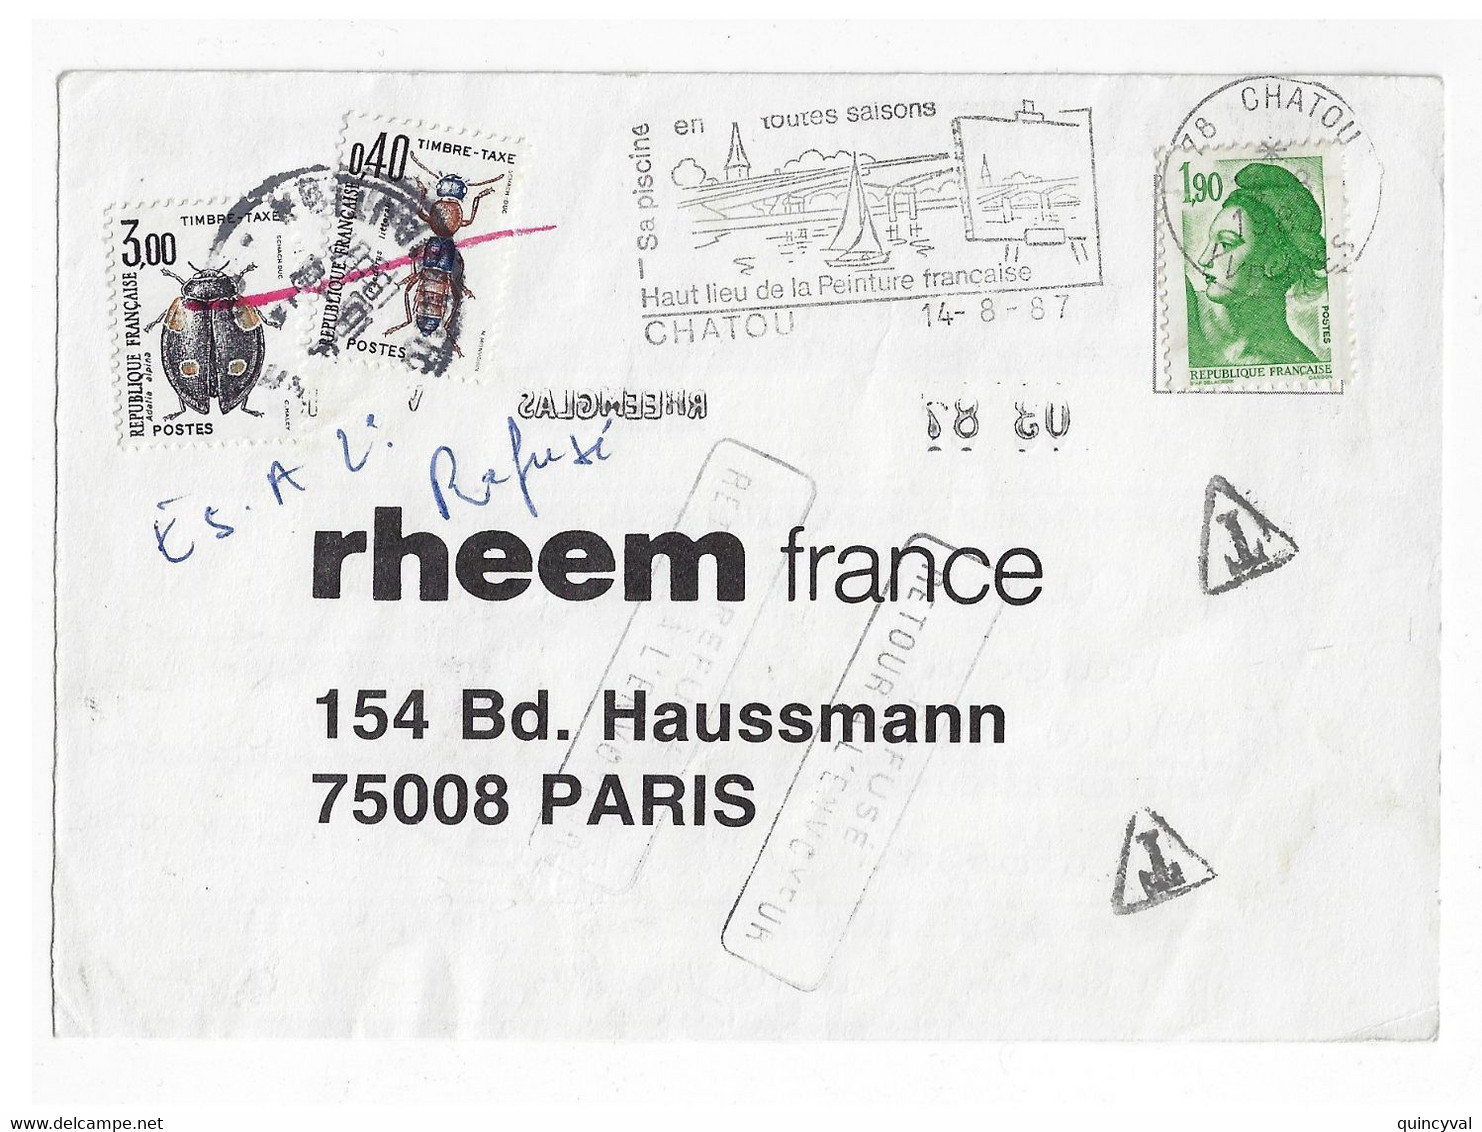 CHATOU 78 Carte Postale Commerciale RHEEM Affranchie Liberté 1,90 F Yv 2424 Ob 1987 TAXE REFUSEE Insectes Yv T 110 111 - 1960-.... Storia Postale